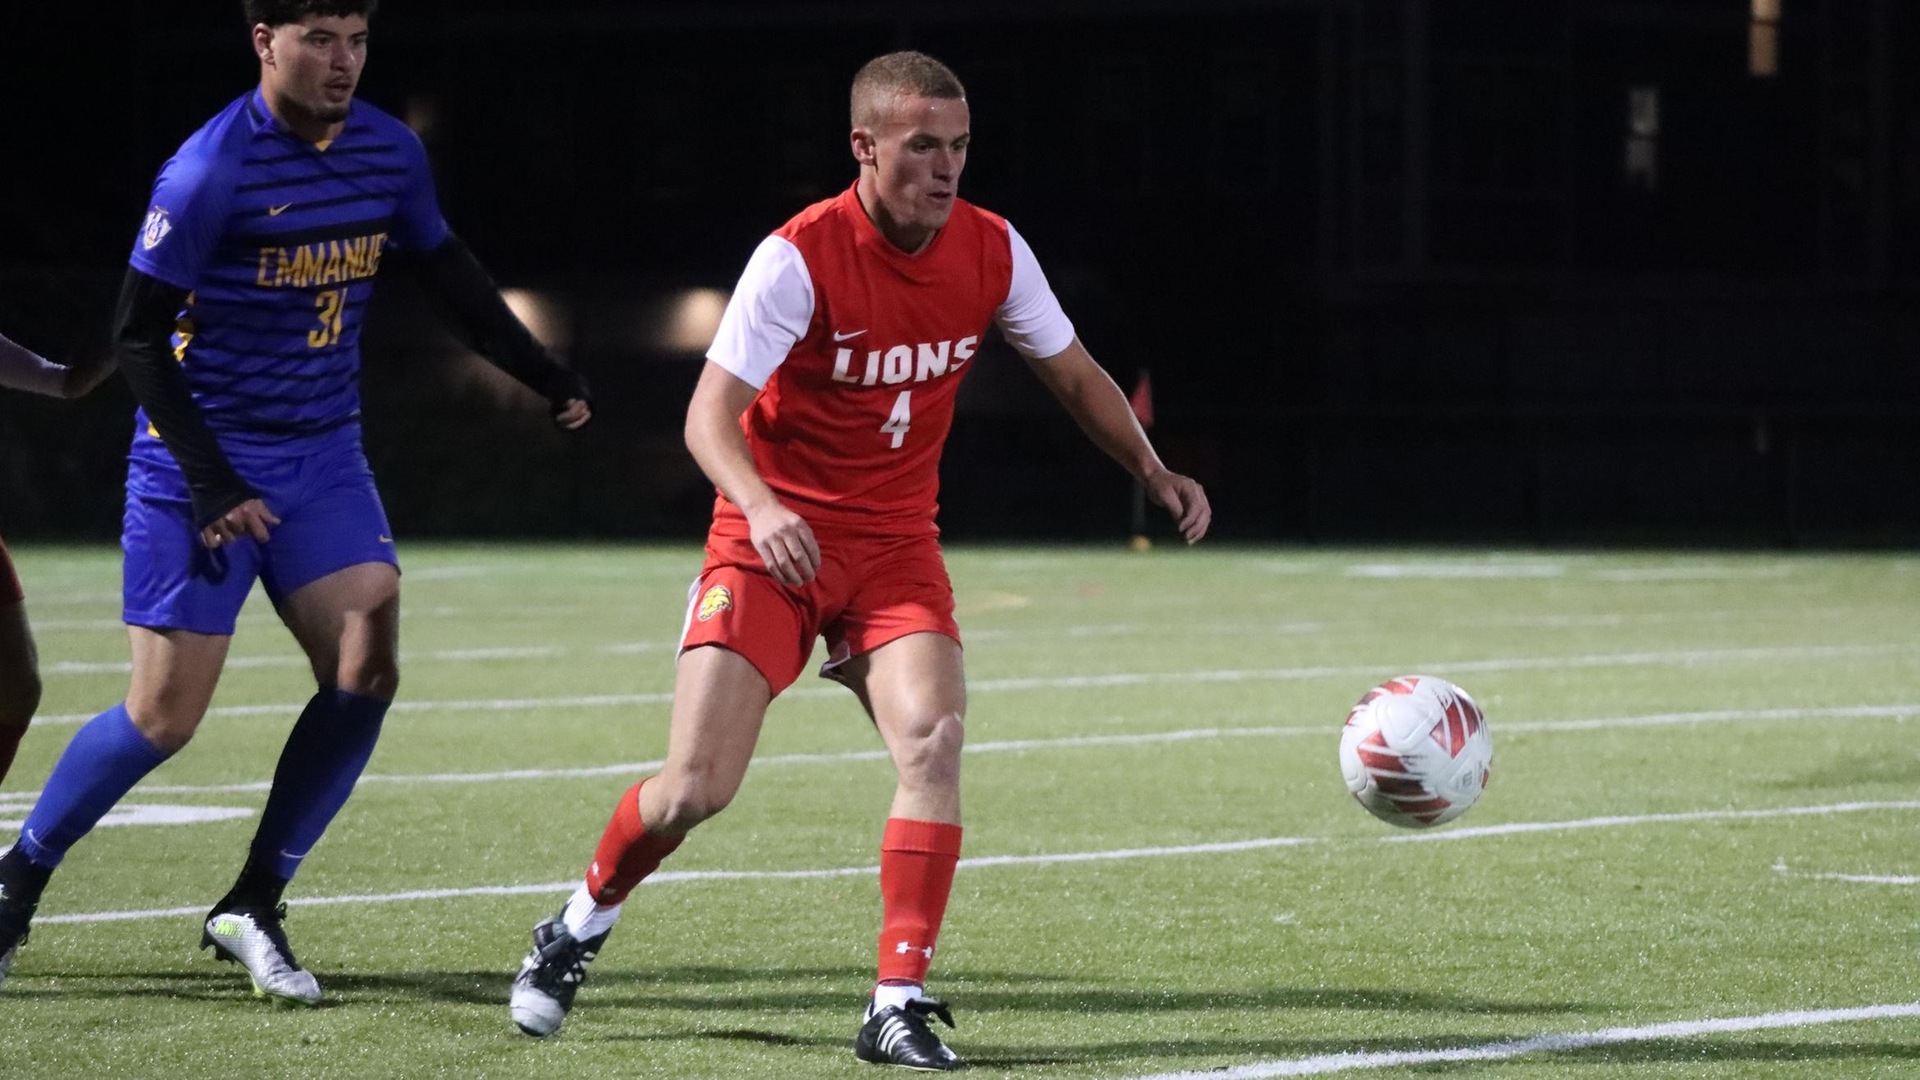 Men’s Soccer Earns Crucial 3-1 Victory at Morrisville